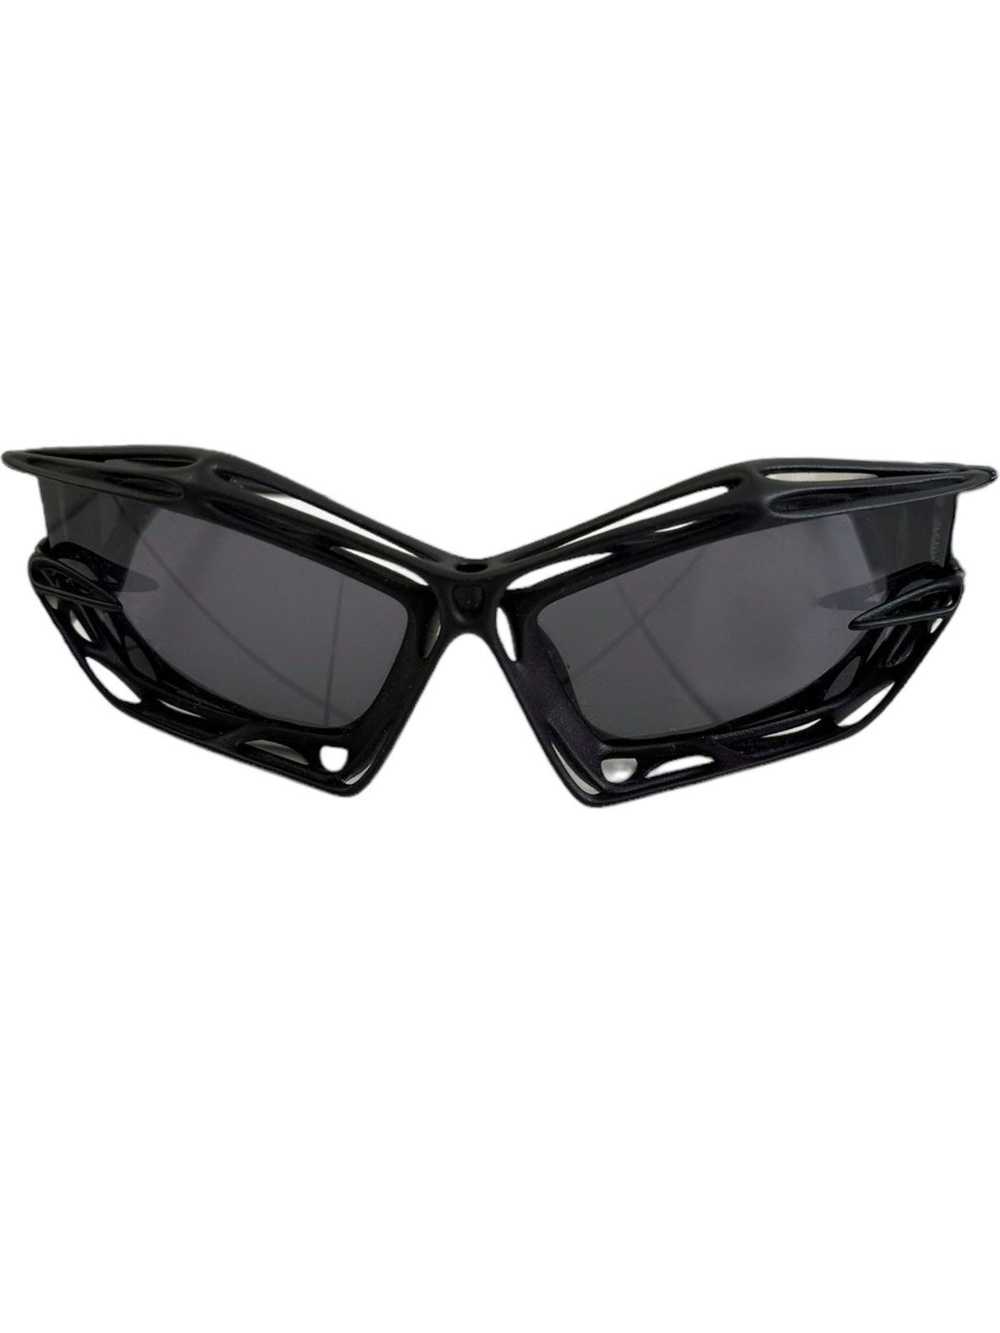 Givenchy 3D Print Cut Cage Sunglasses - image 2